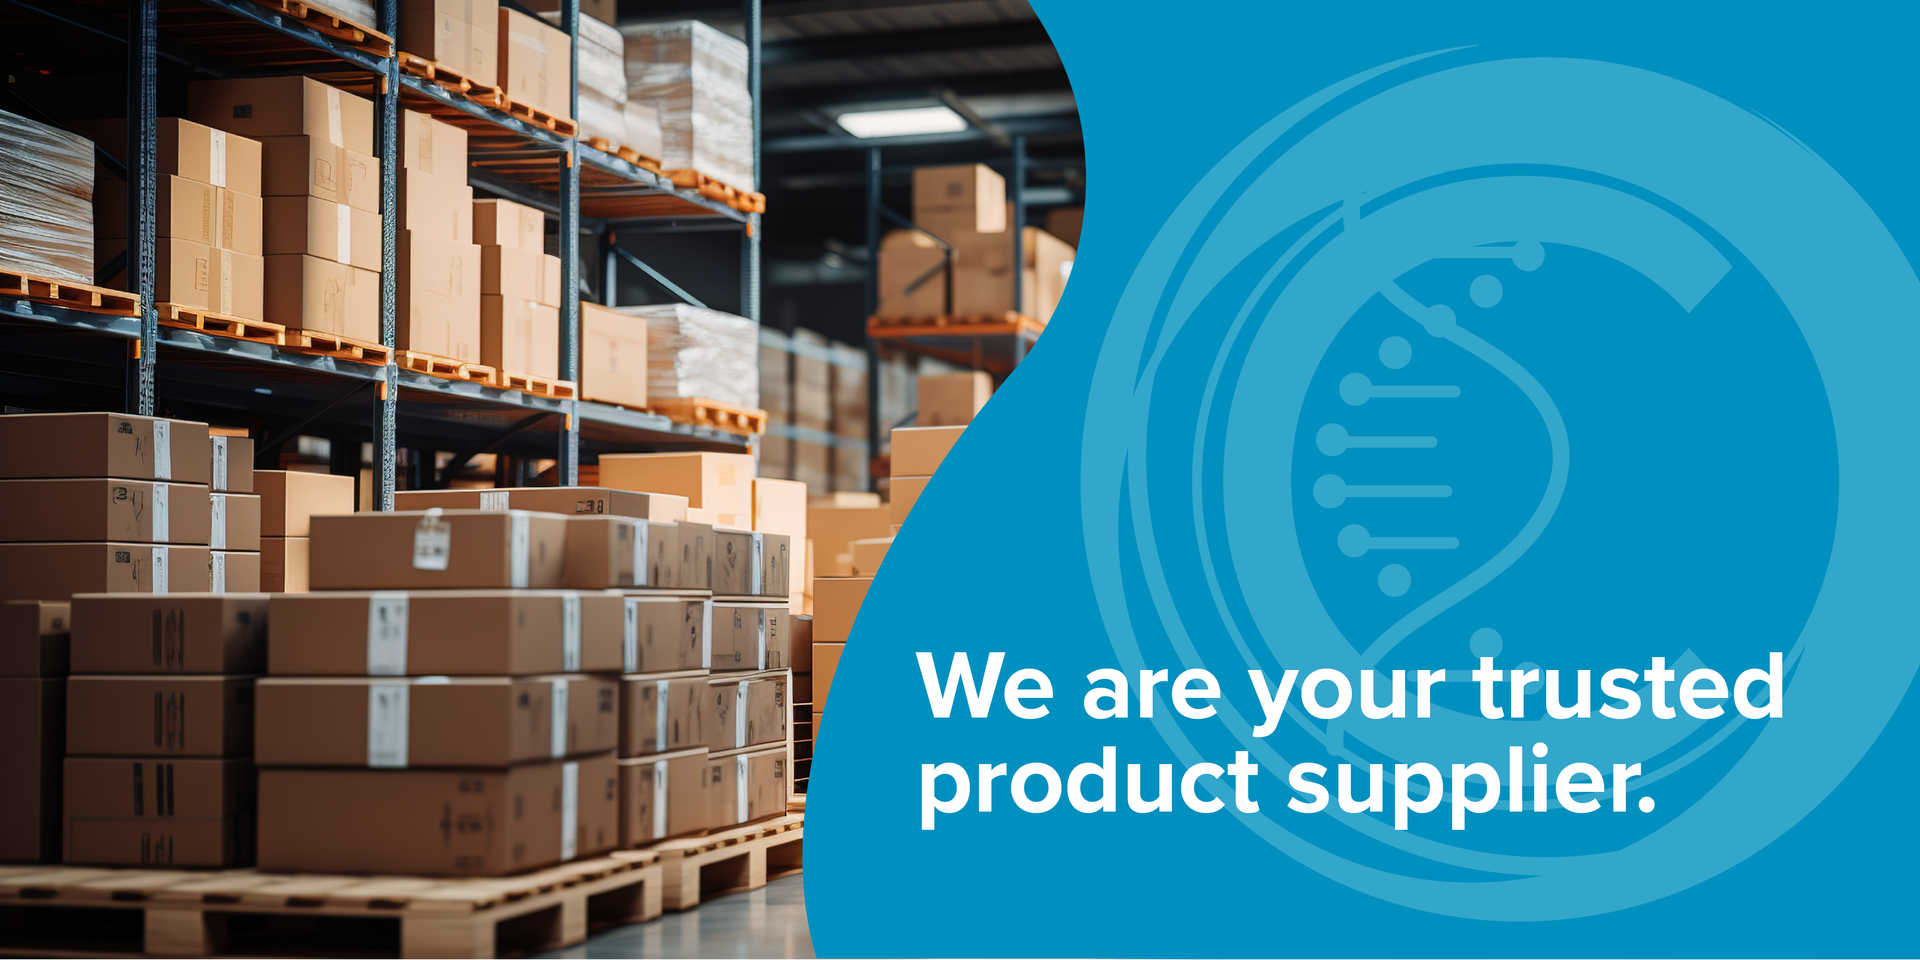 We are your trusted product supplier.